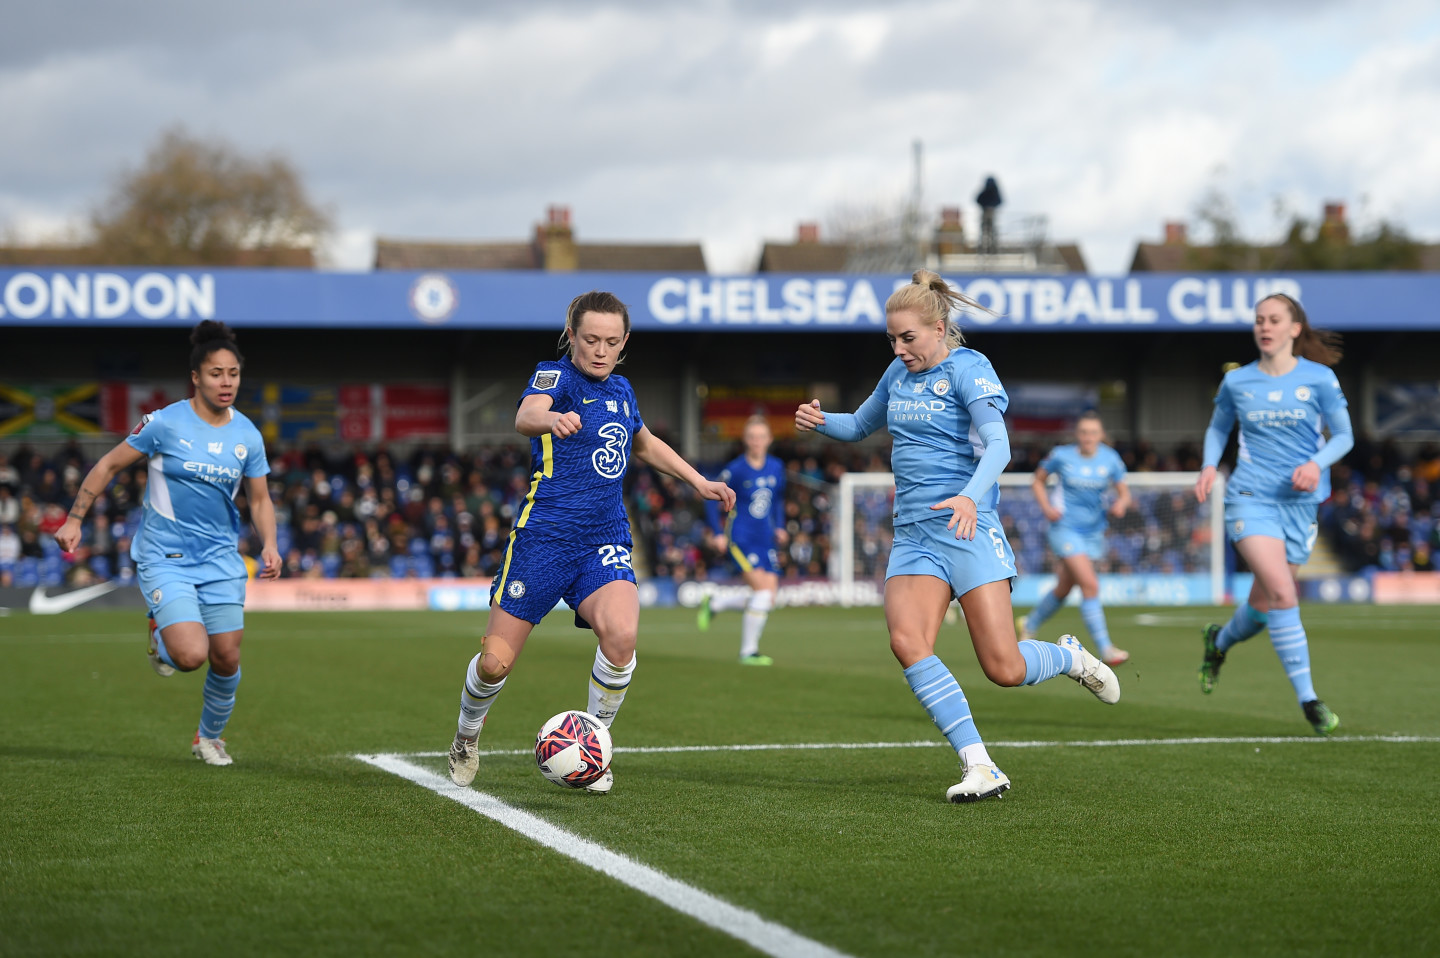 Chelsea Women vs Manchester City Women Kick-off time, how to watch live and more! News Official Site Chelsea Football Club